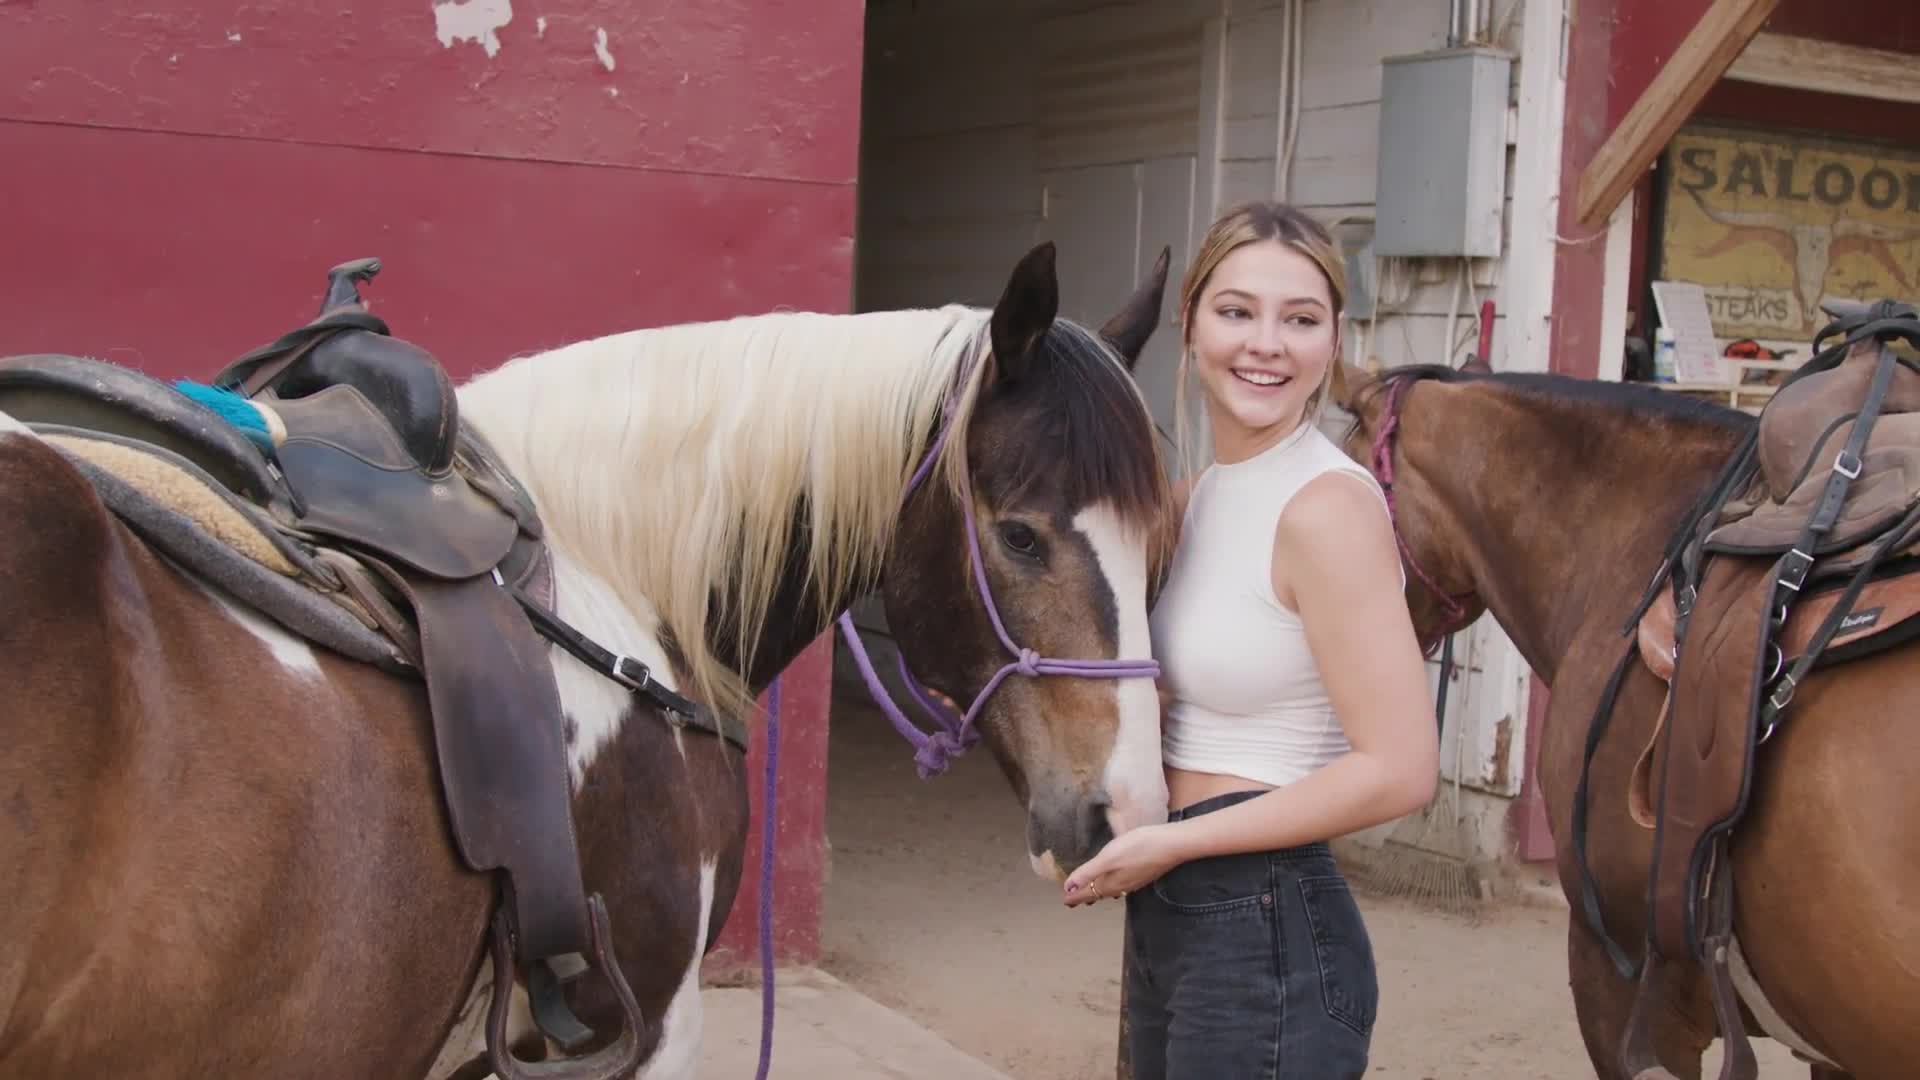 Watch 24 Hours With Madelyn Cline, From the Stables to the Hollywood Sign 24 Hours With Vogue picture image